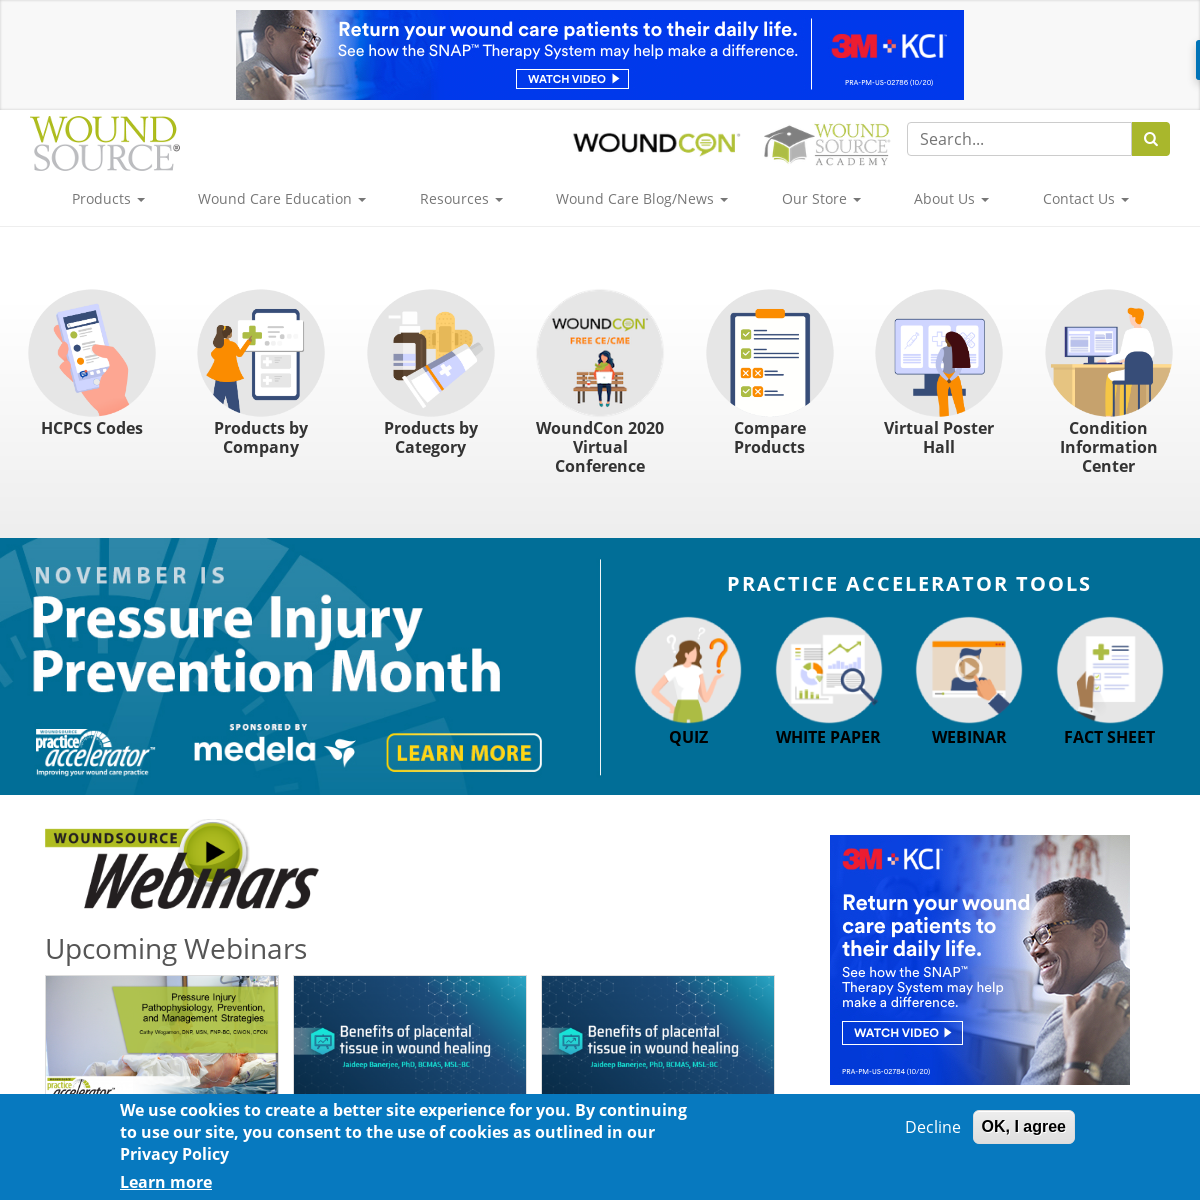 A complete backup of woundsource.com